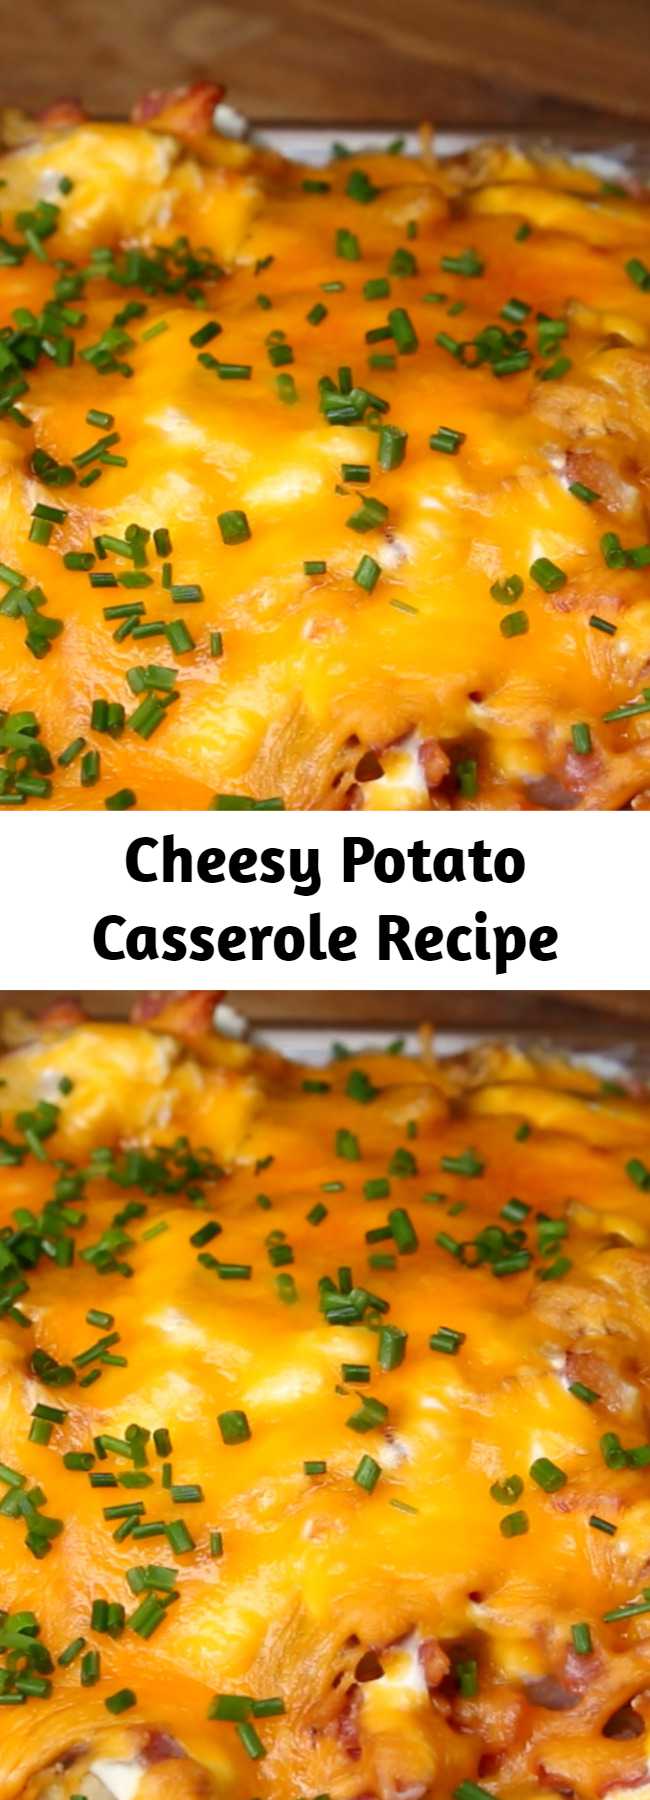 Cheesy Potato Casserole Recipe - This cheesy potato casserole is the perfect way to feed a family of picky eaters. With all of the components of beloved loaded potato skins (like bacon, sour cream, and cheese), it’s practically impossible for anyone to dislike this casserole. It’s make-ahead friendly, filling, and easily made vegetarian by omitting the bacon. If you’re looking for the ultimate weeknight casserole, this is your recipe.